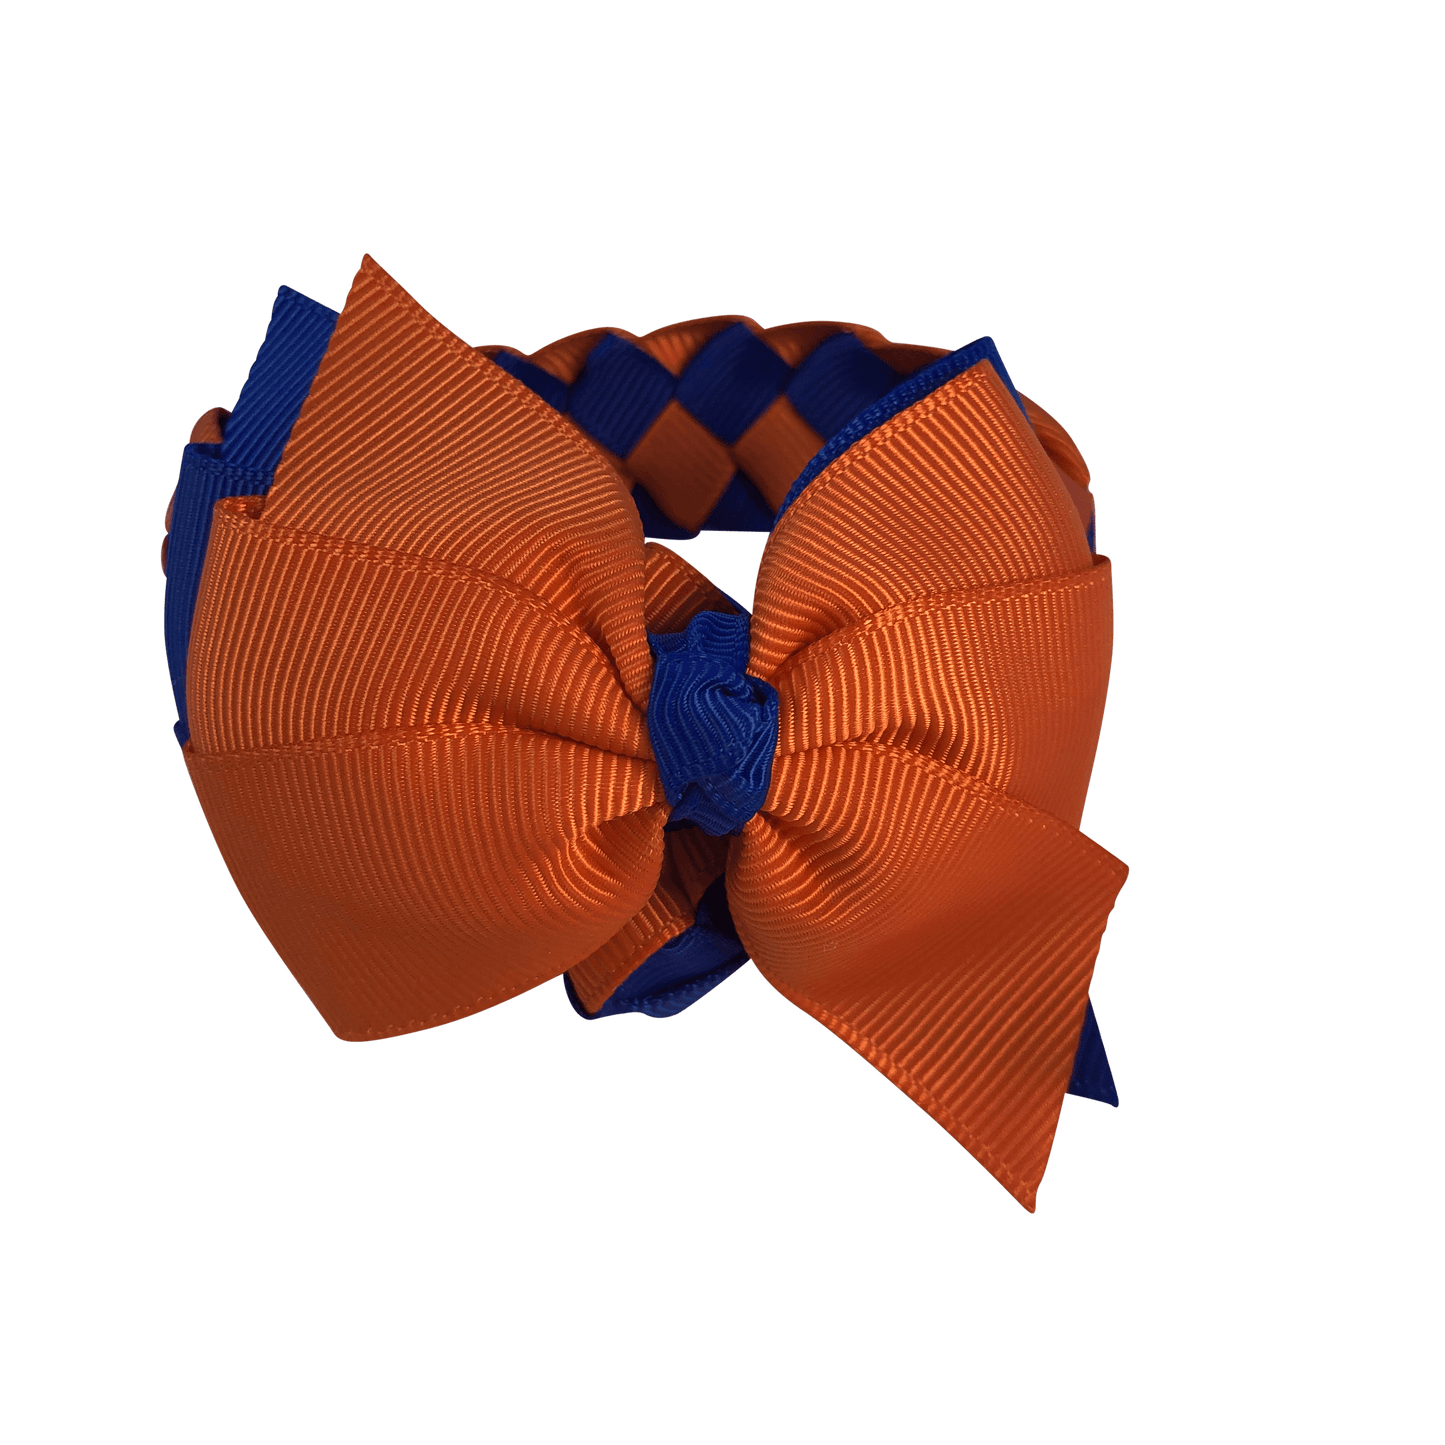 Orange & Royal Blue Hair Accessories - Assorted Hair Accessories - School Uniform Hair Accessories - Ponytails and Fairytales